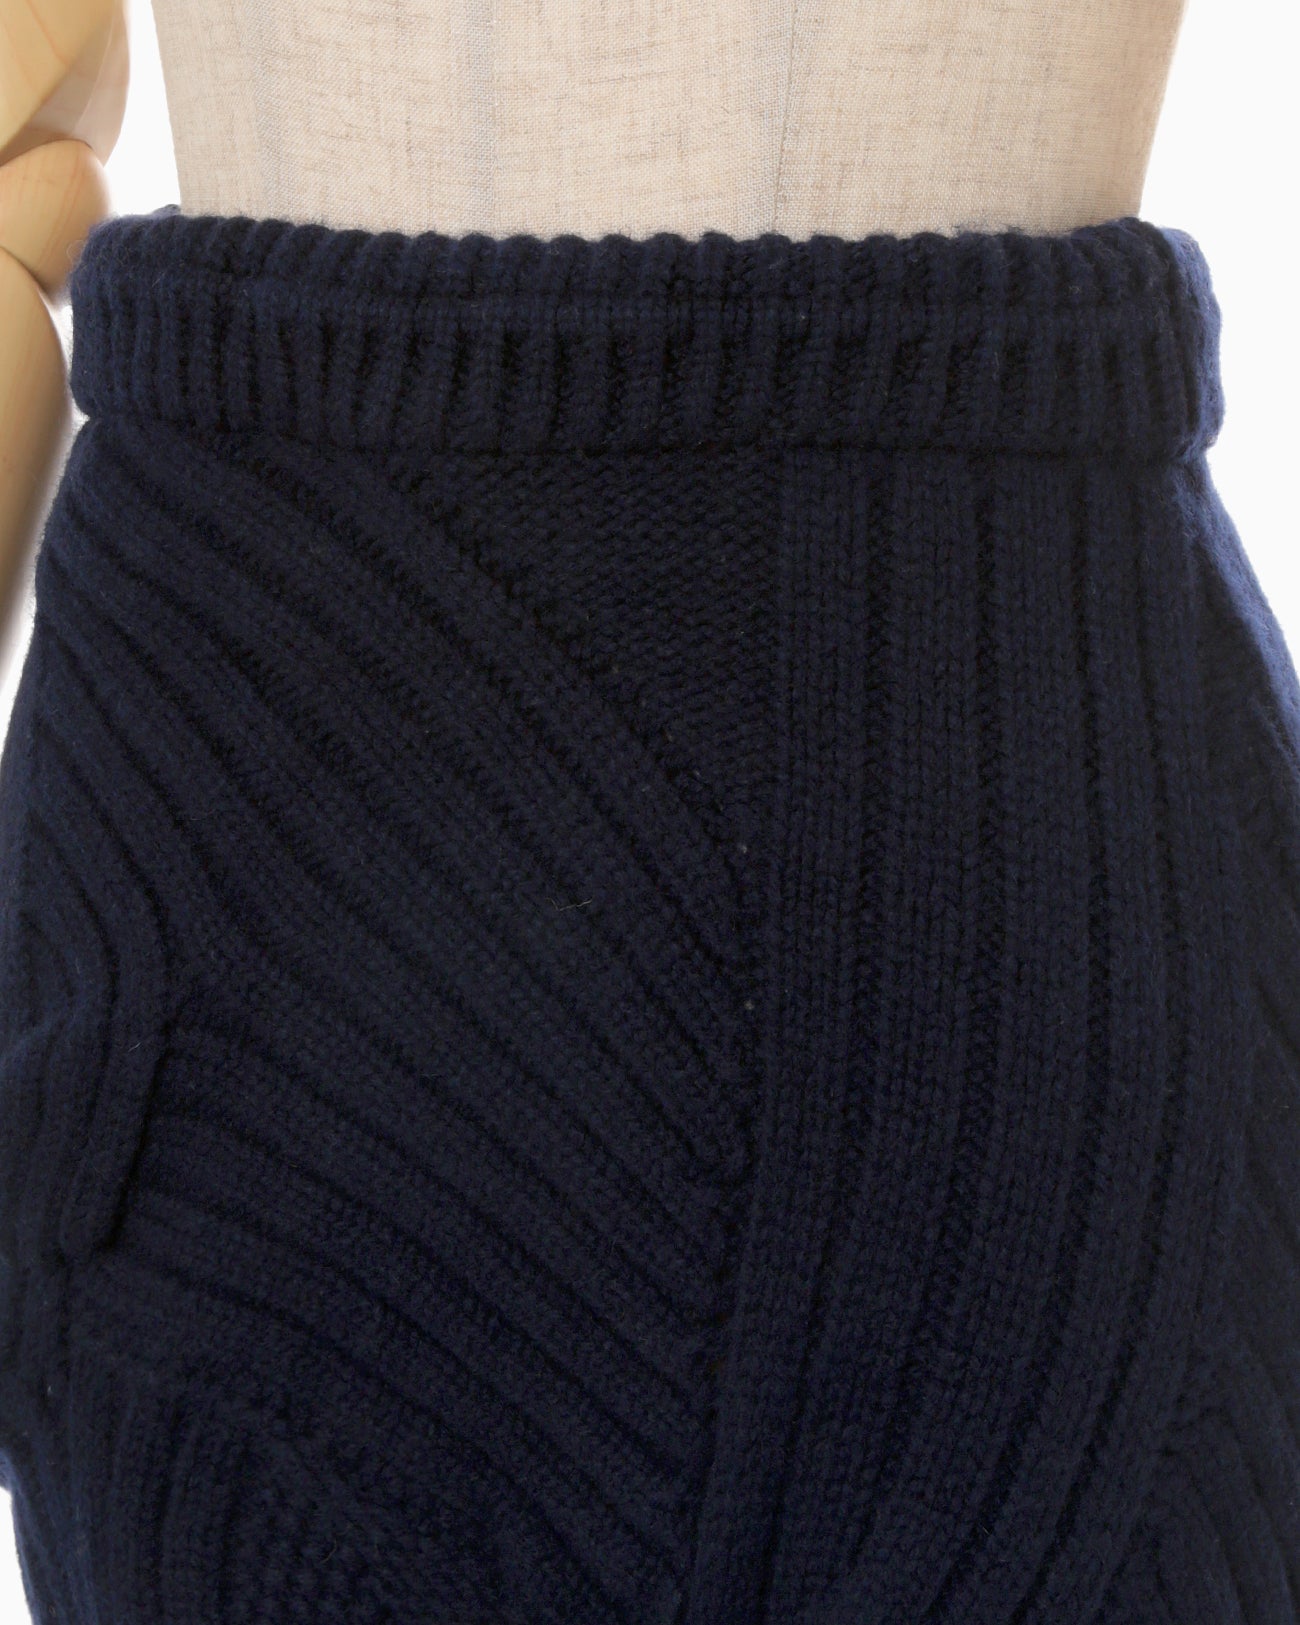 Basket Motif Cable Stitch Knitted Skirt - navy